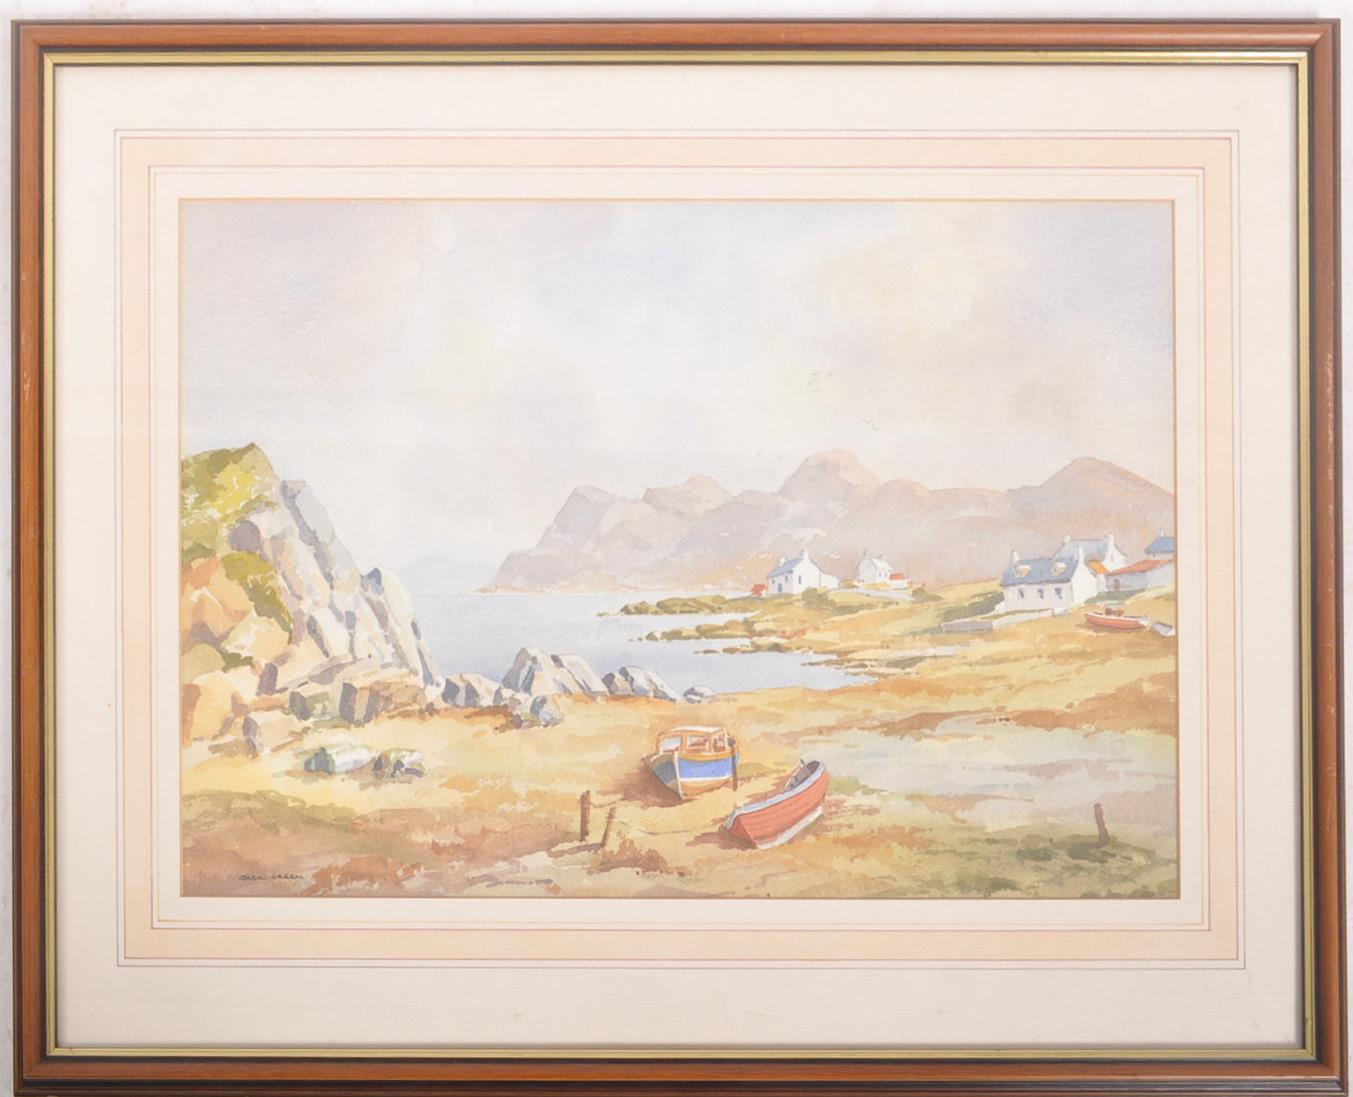 JACK GREEN - 20TH CENTURY WATERCOLOUR SEASCAPE PAINTING